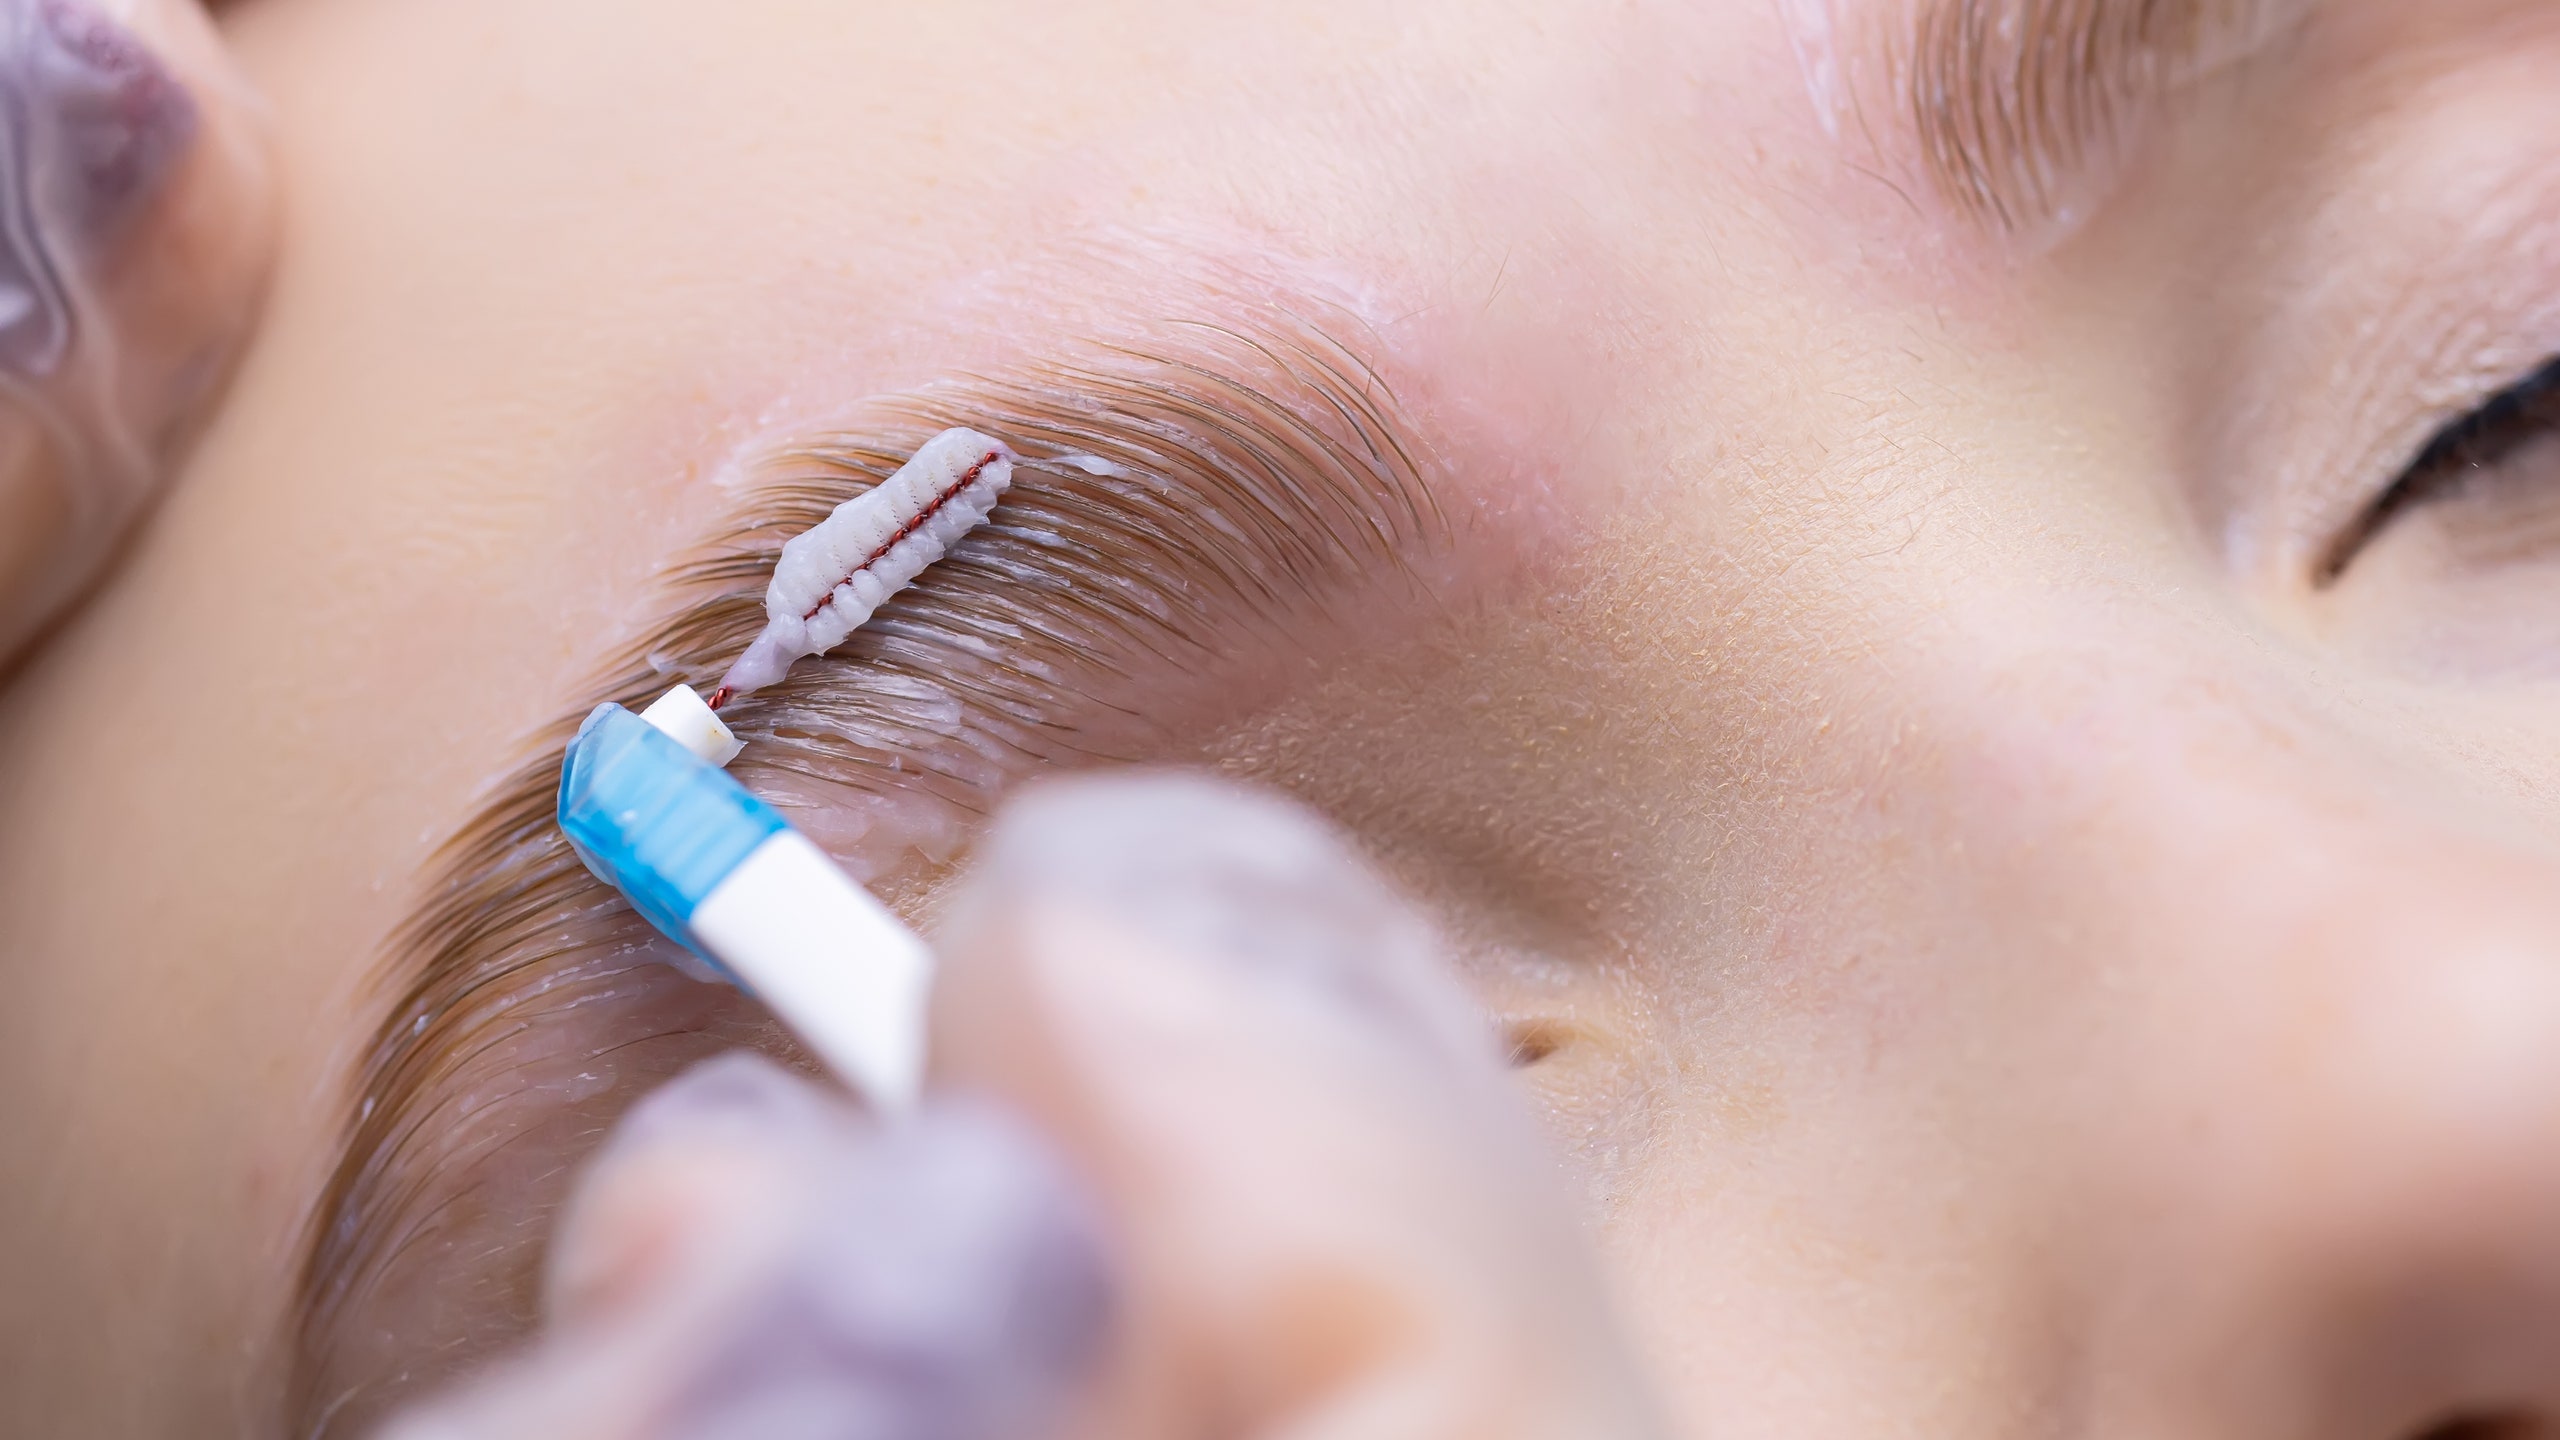 The Beauty Experts: Your Destination for Eyebrow Grooming